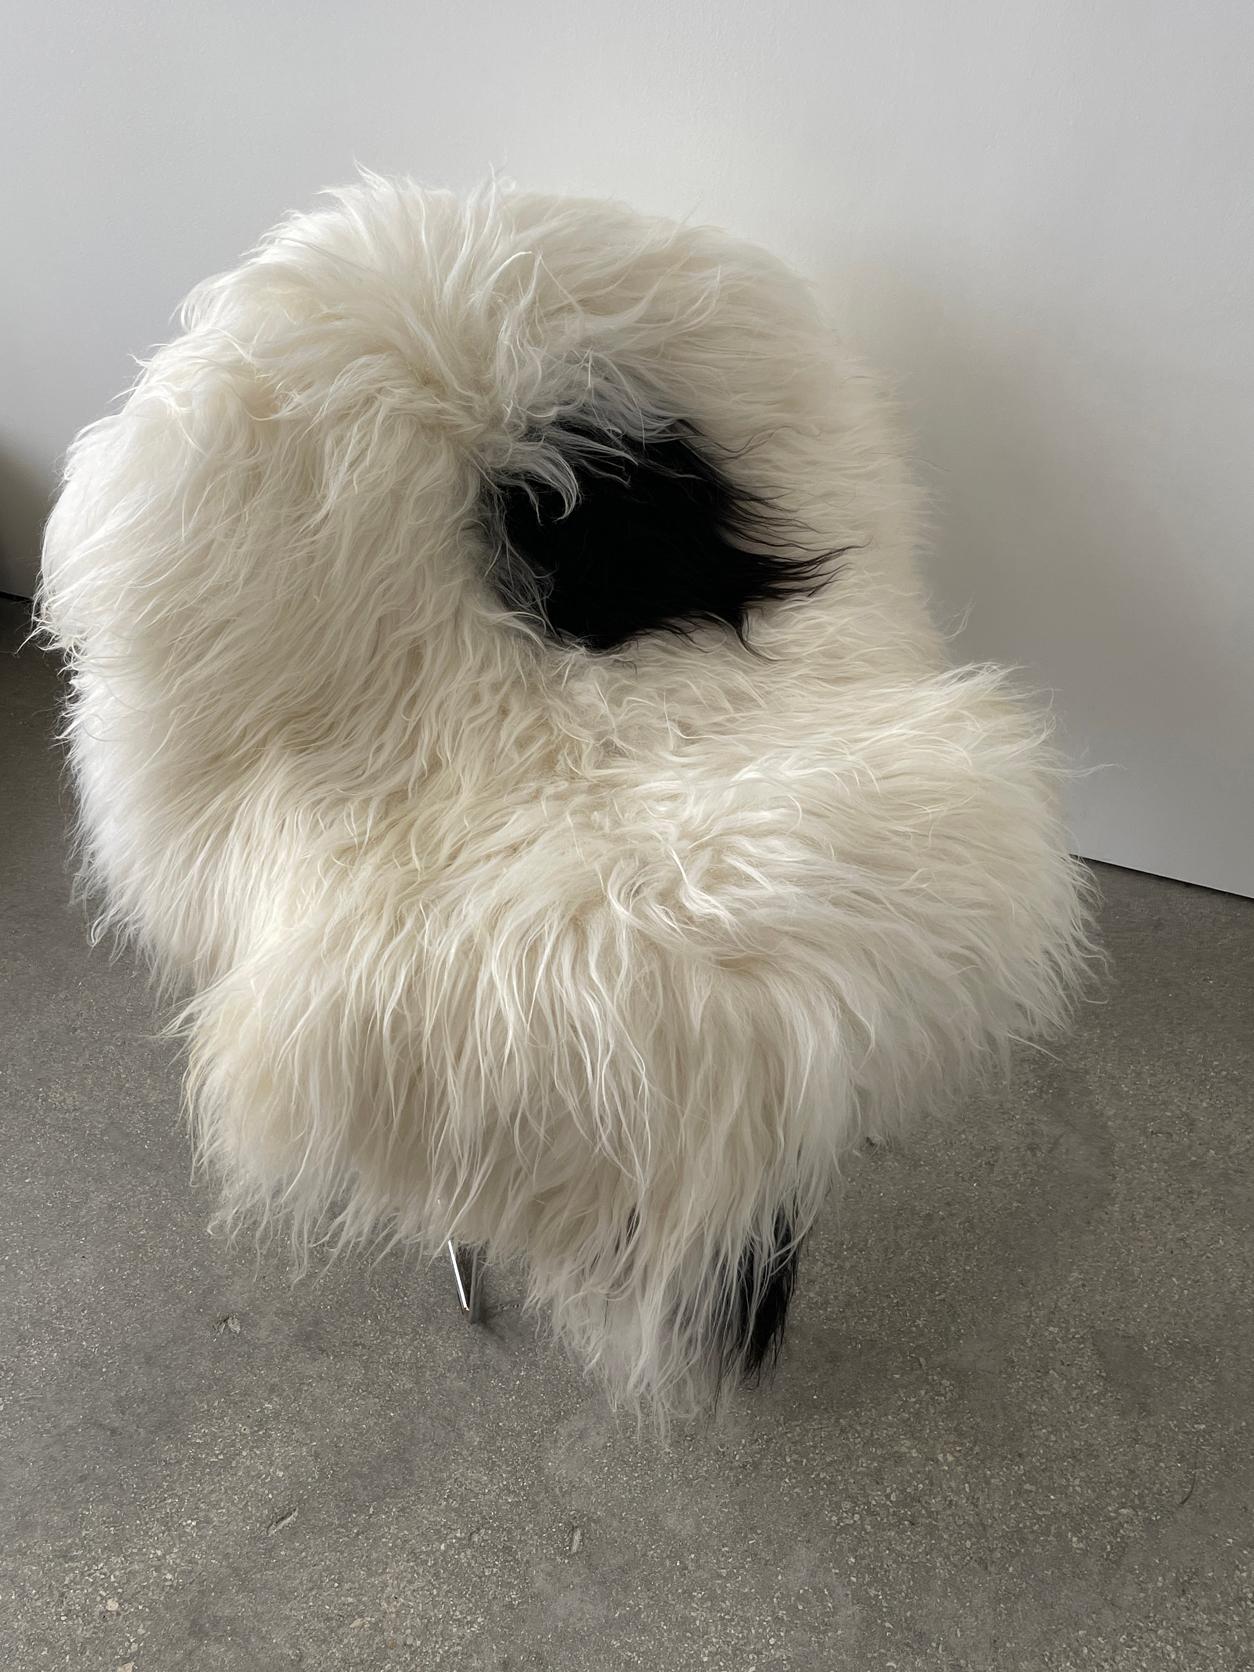 21st Century Spotted Icelandic Sheepskin with a beautiful thick coat and unique spotted colorway. Perfect XL size as a rug or cover for furniture.